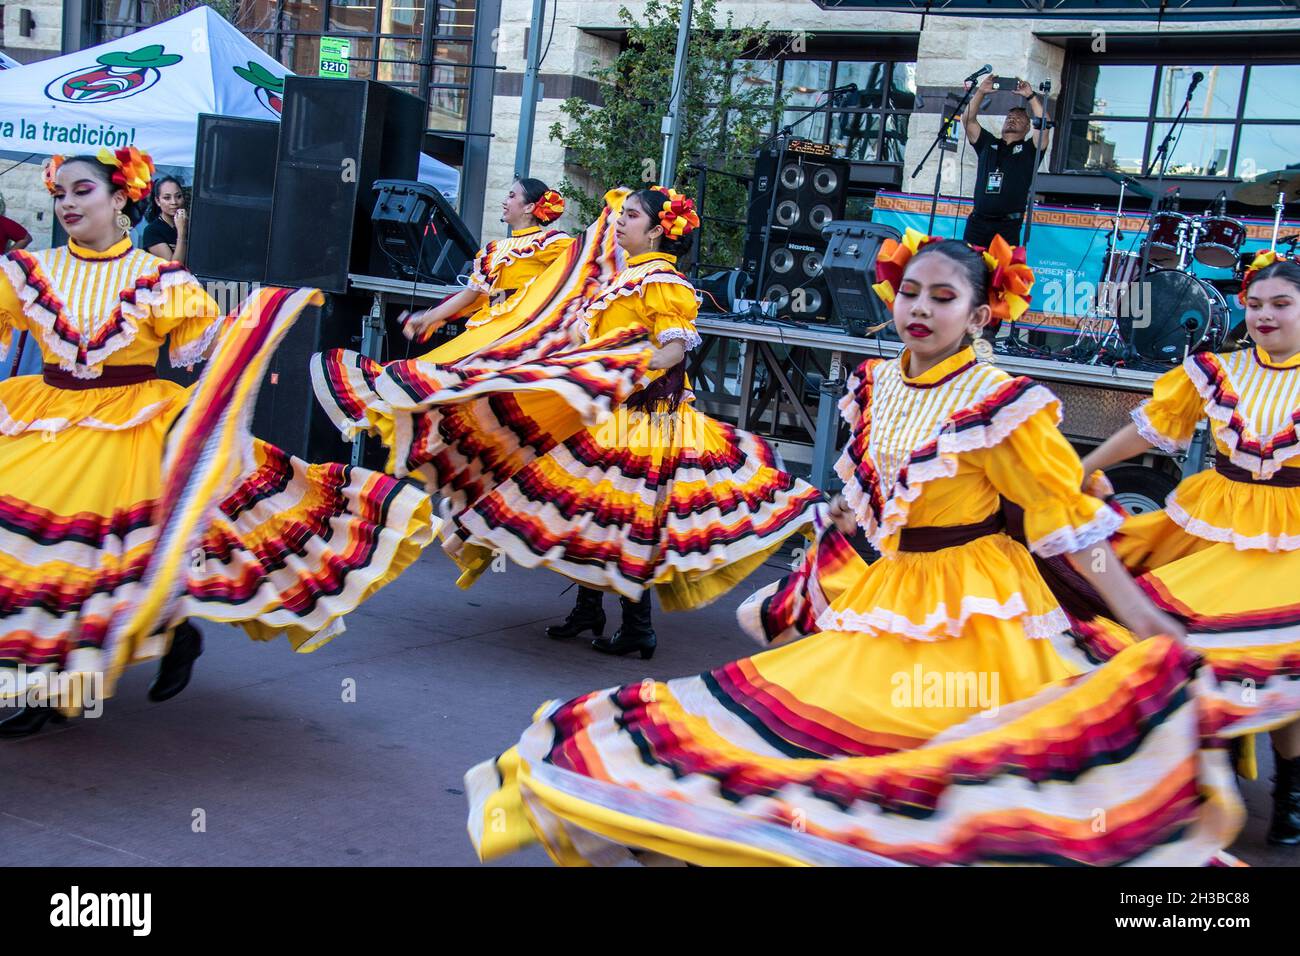 2021 10 09 Tulsa USA Dancing Hispanic girls swirl their beautiful yellow costumes as they dance at a street Festival in front of a stange and speakers Stock Photo